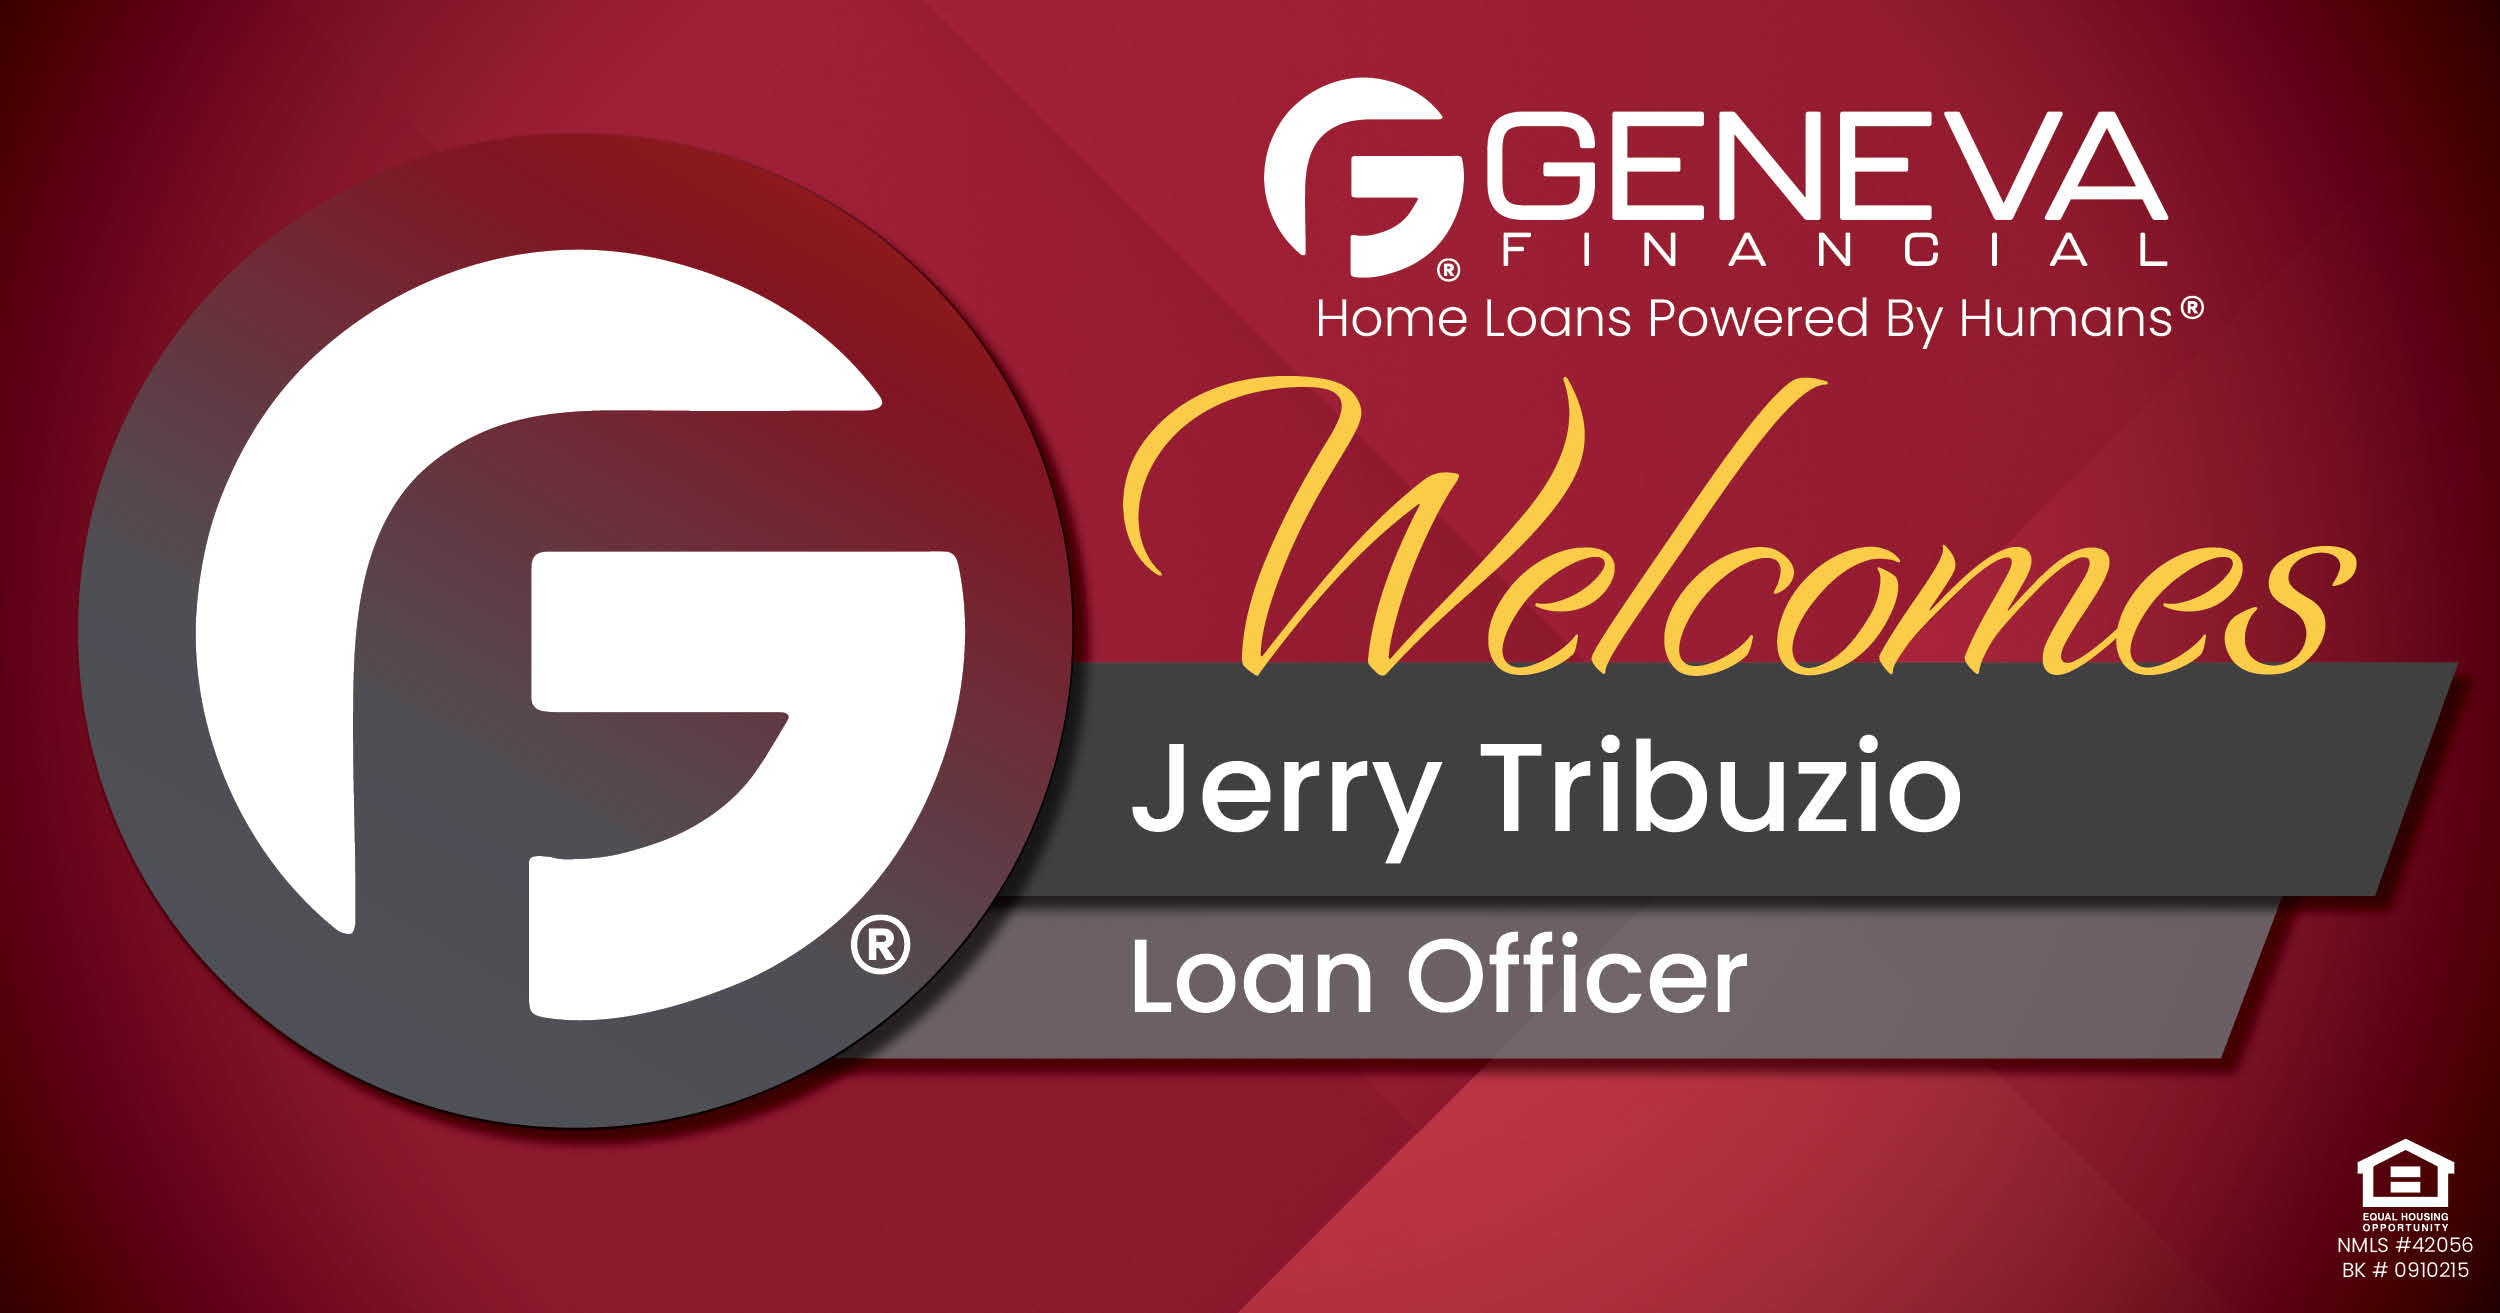 Geneva Financial Welcomes New Loan Officer Jerry Tribuzio to Chicago, Illinois – Home Loans Powered by Humans®.